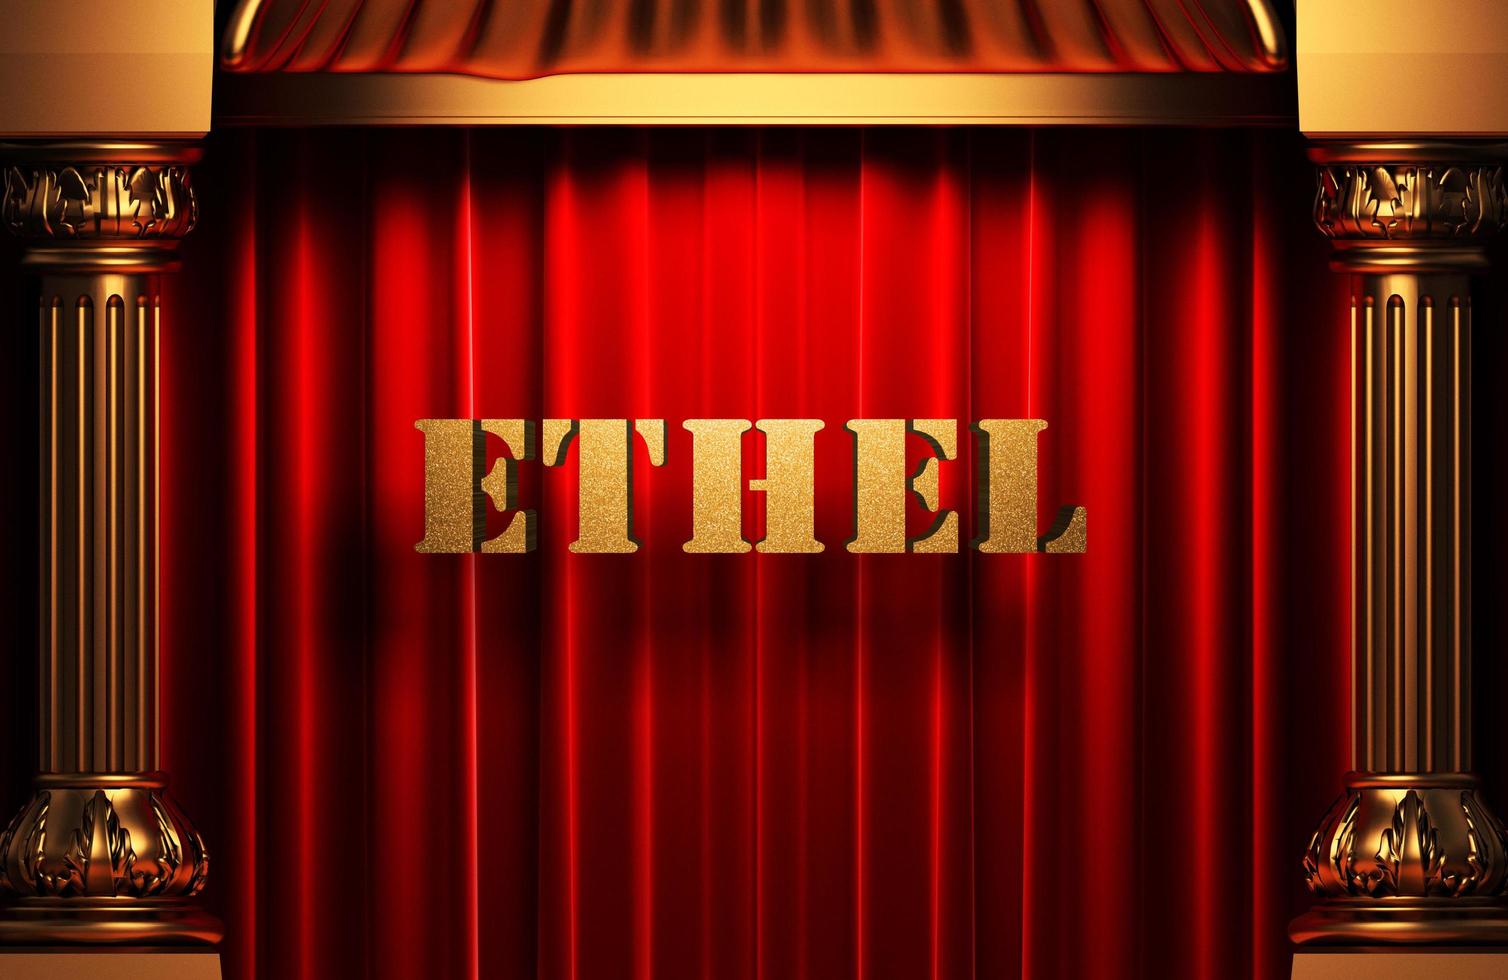 ethel golden word on red curtain photo